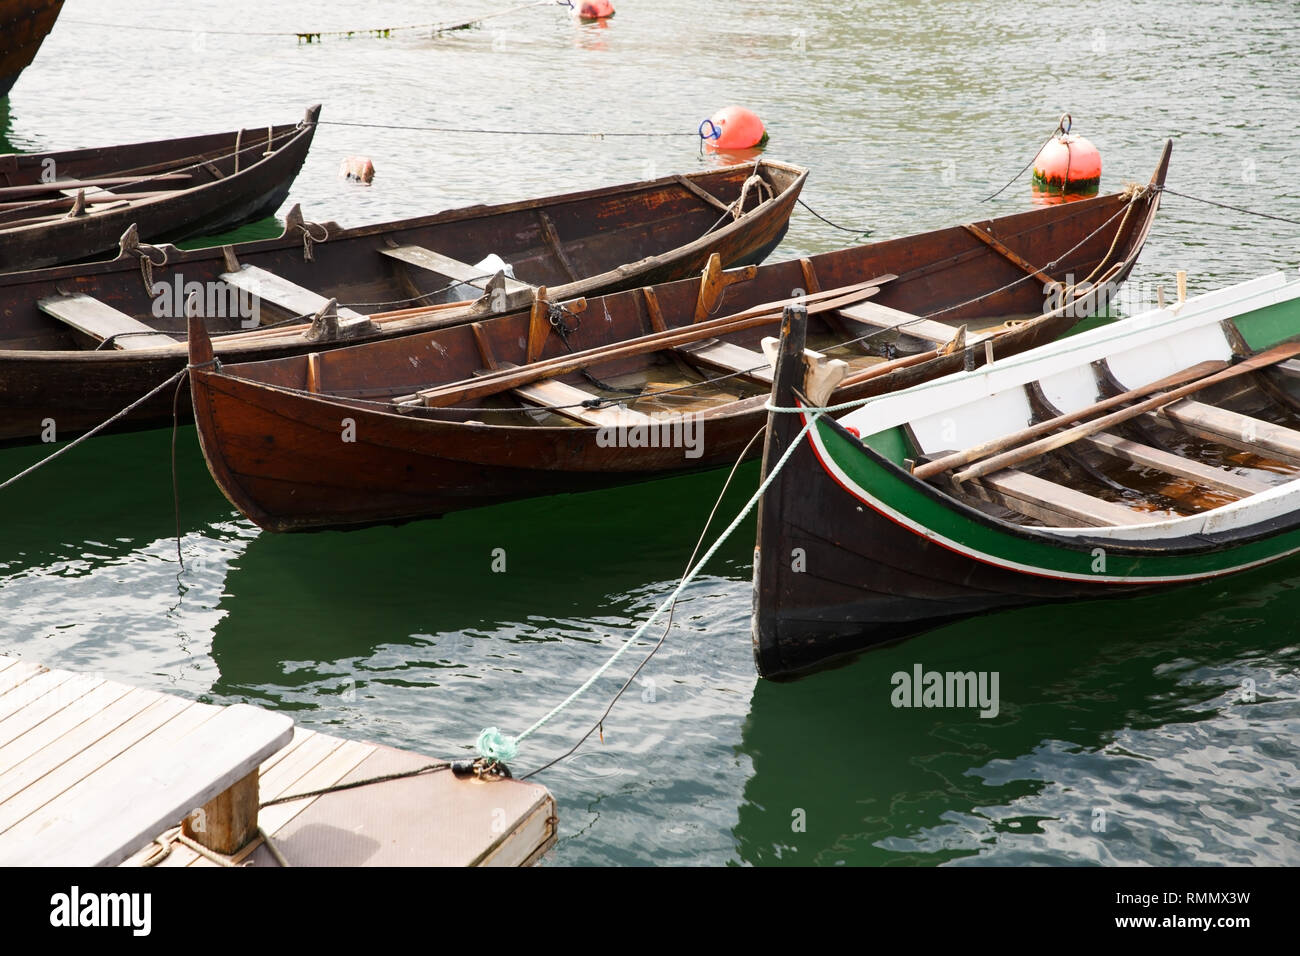 Boats in small harbor in Oslo, Norway. Stock Photo